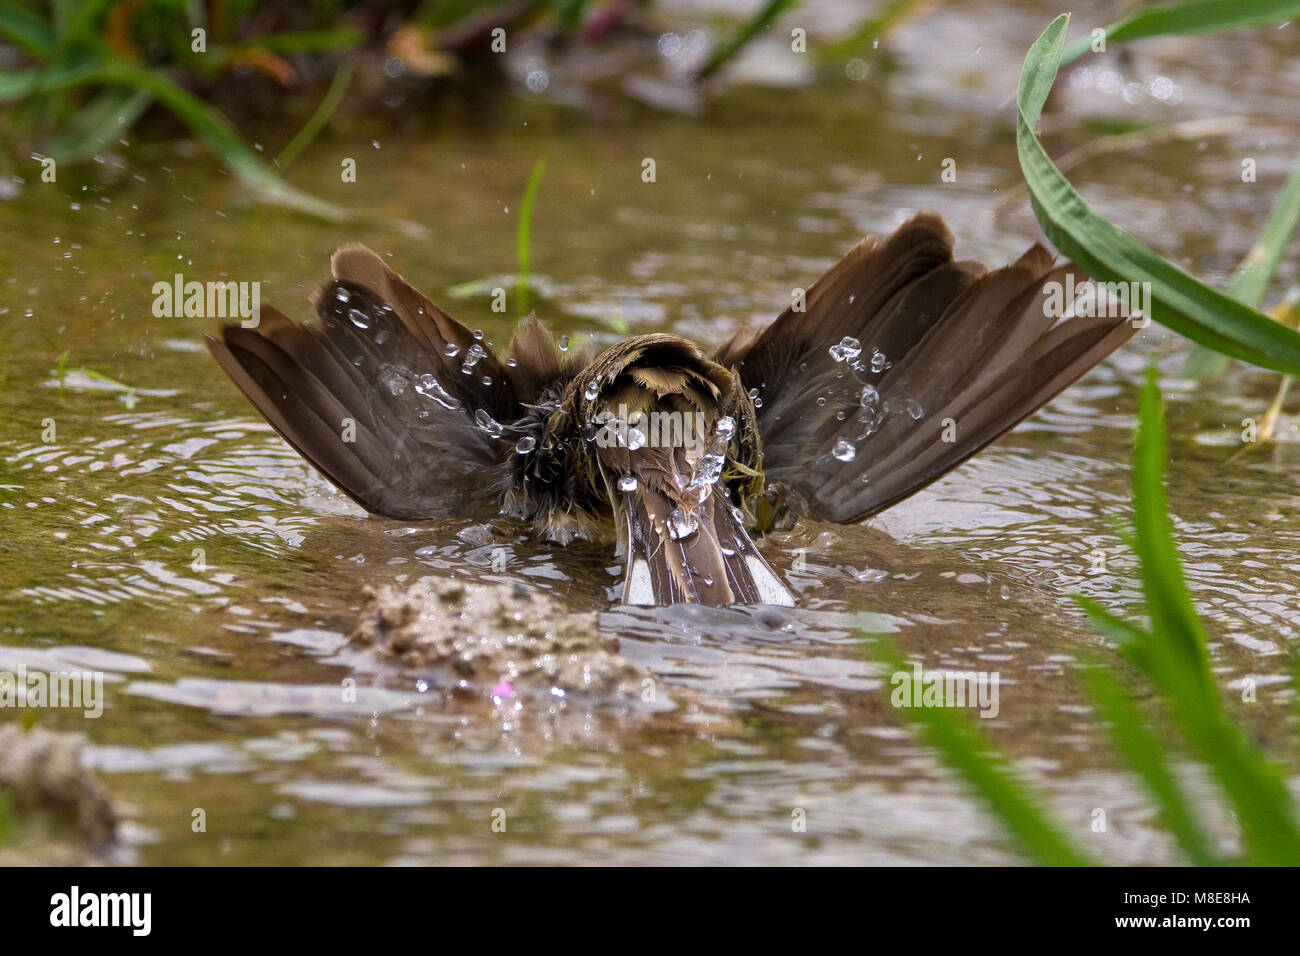 Smyrnagors zich wassend; Cinereous Bunting washing Stock Photo